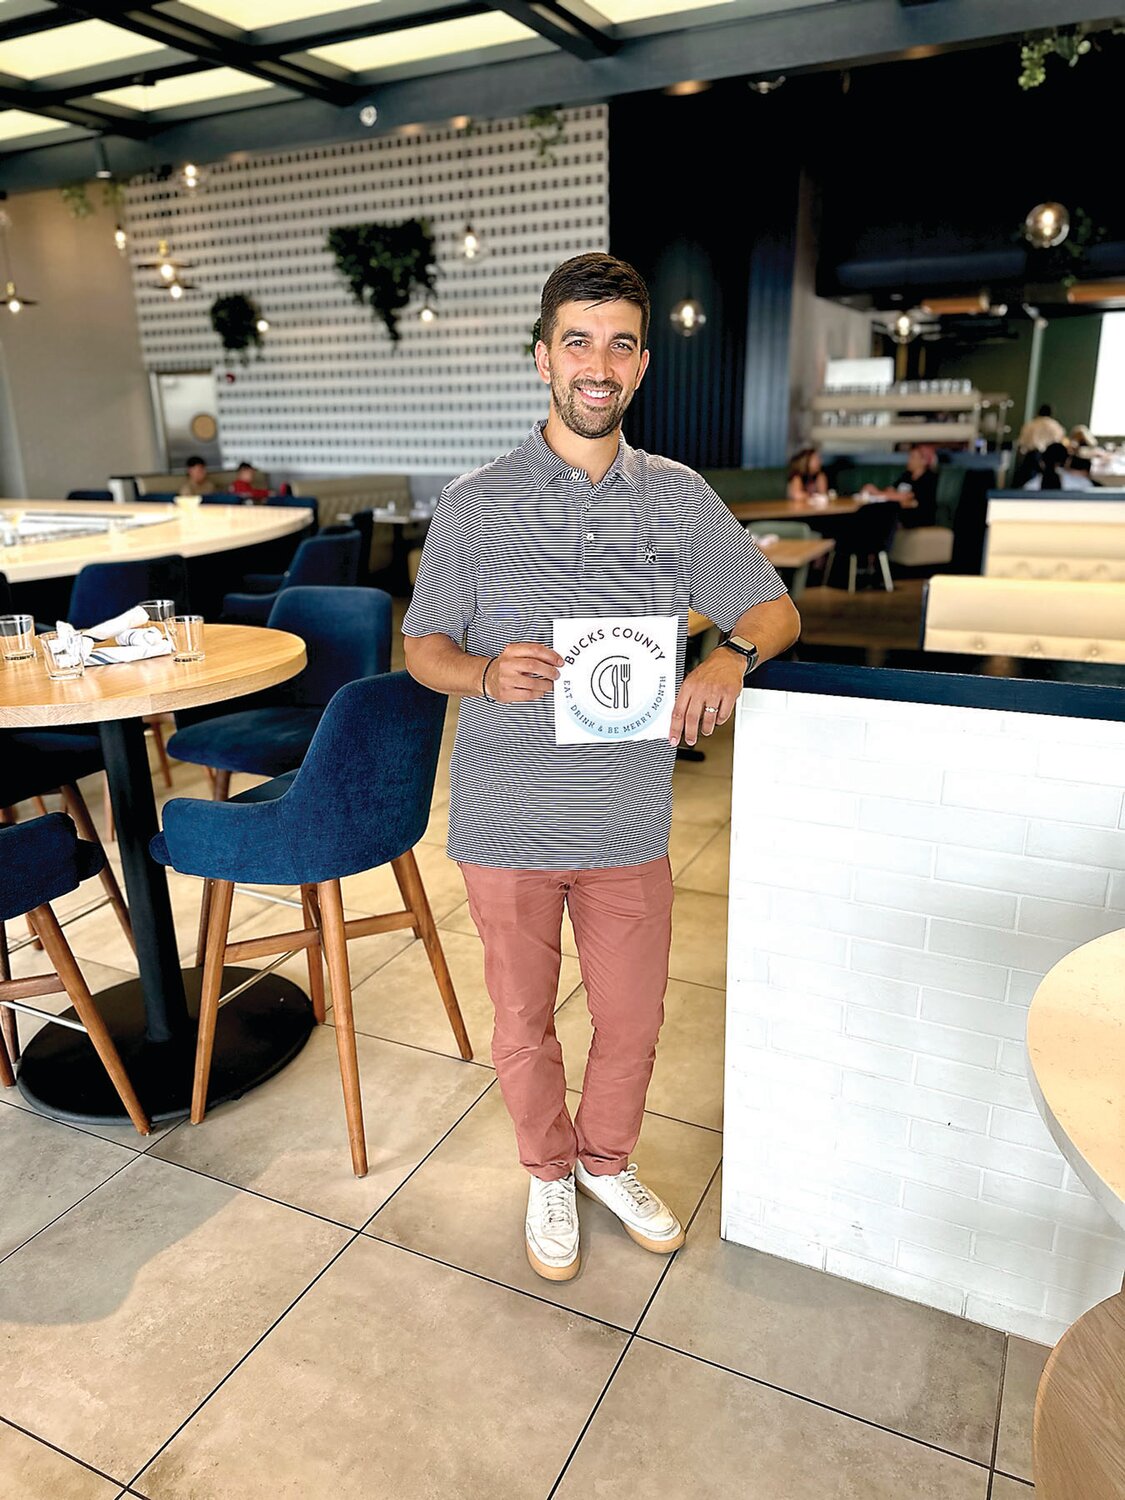 Mike Christou, owner of Ardana Food and Drink, holds up the Bucks County Eat, Drink and Be Merry Month logo. All participating locations will receive a partnership decal to display on the window of their business.